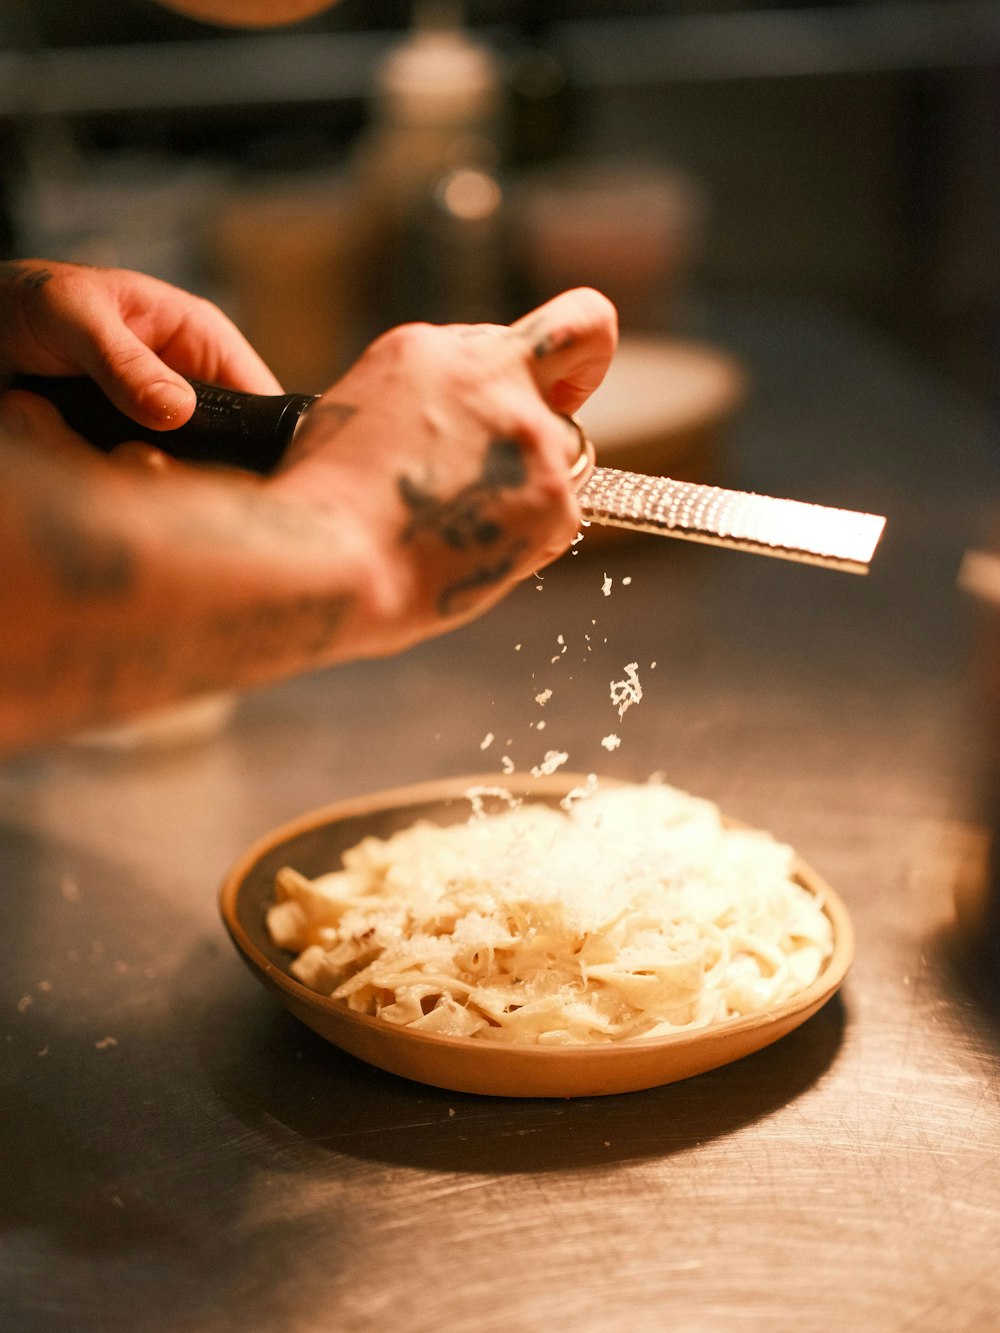 a person is cutting a bowl of rice